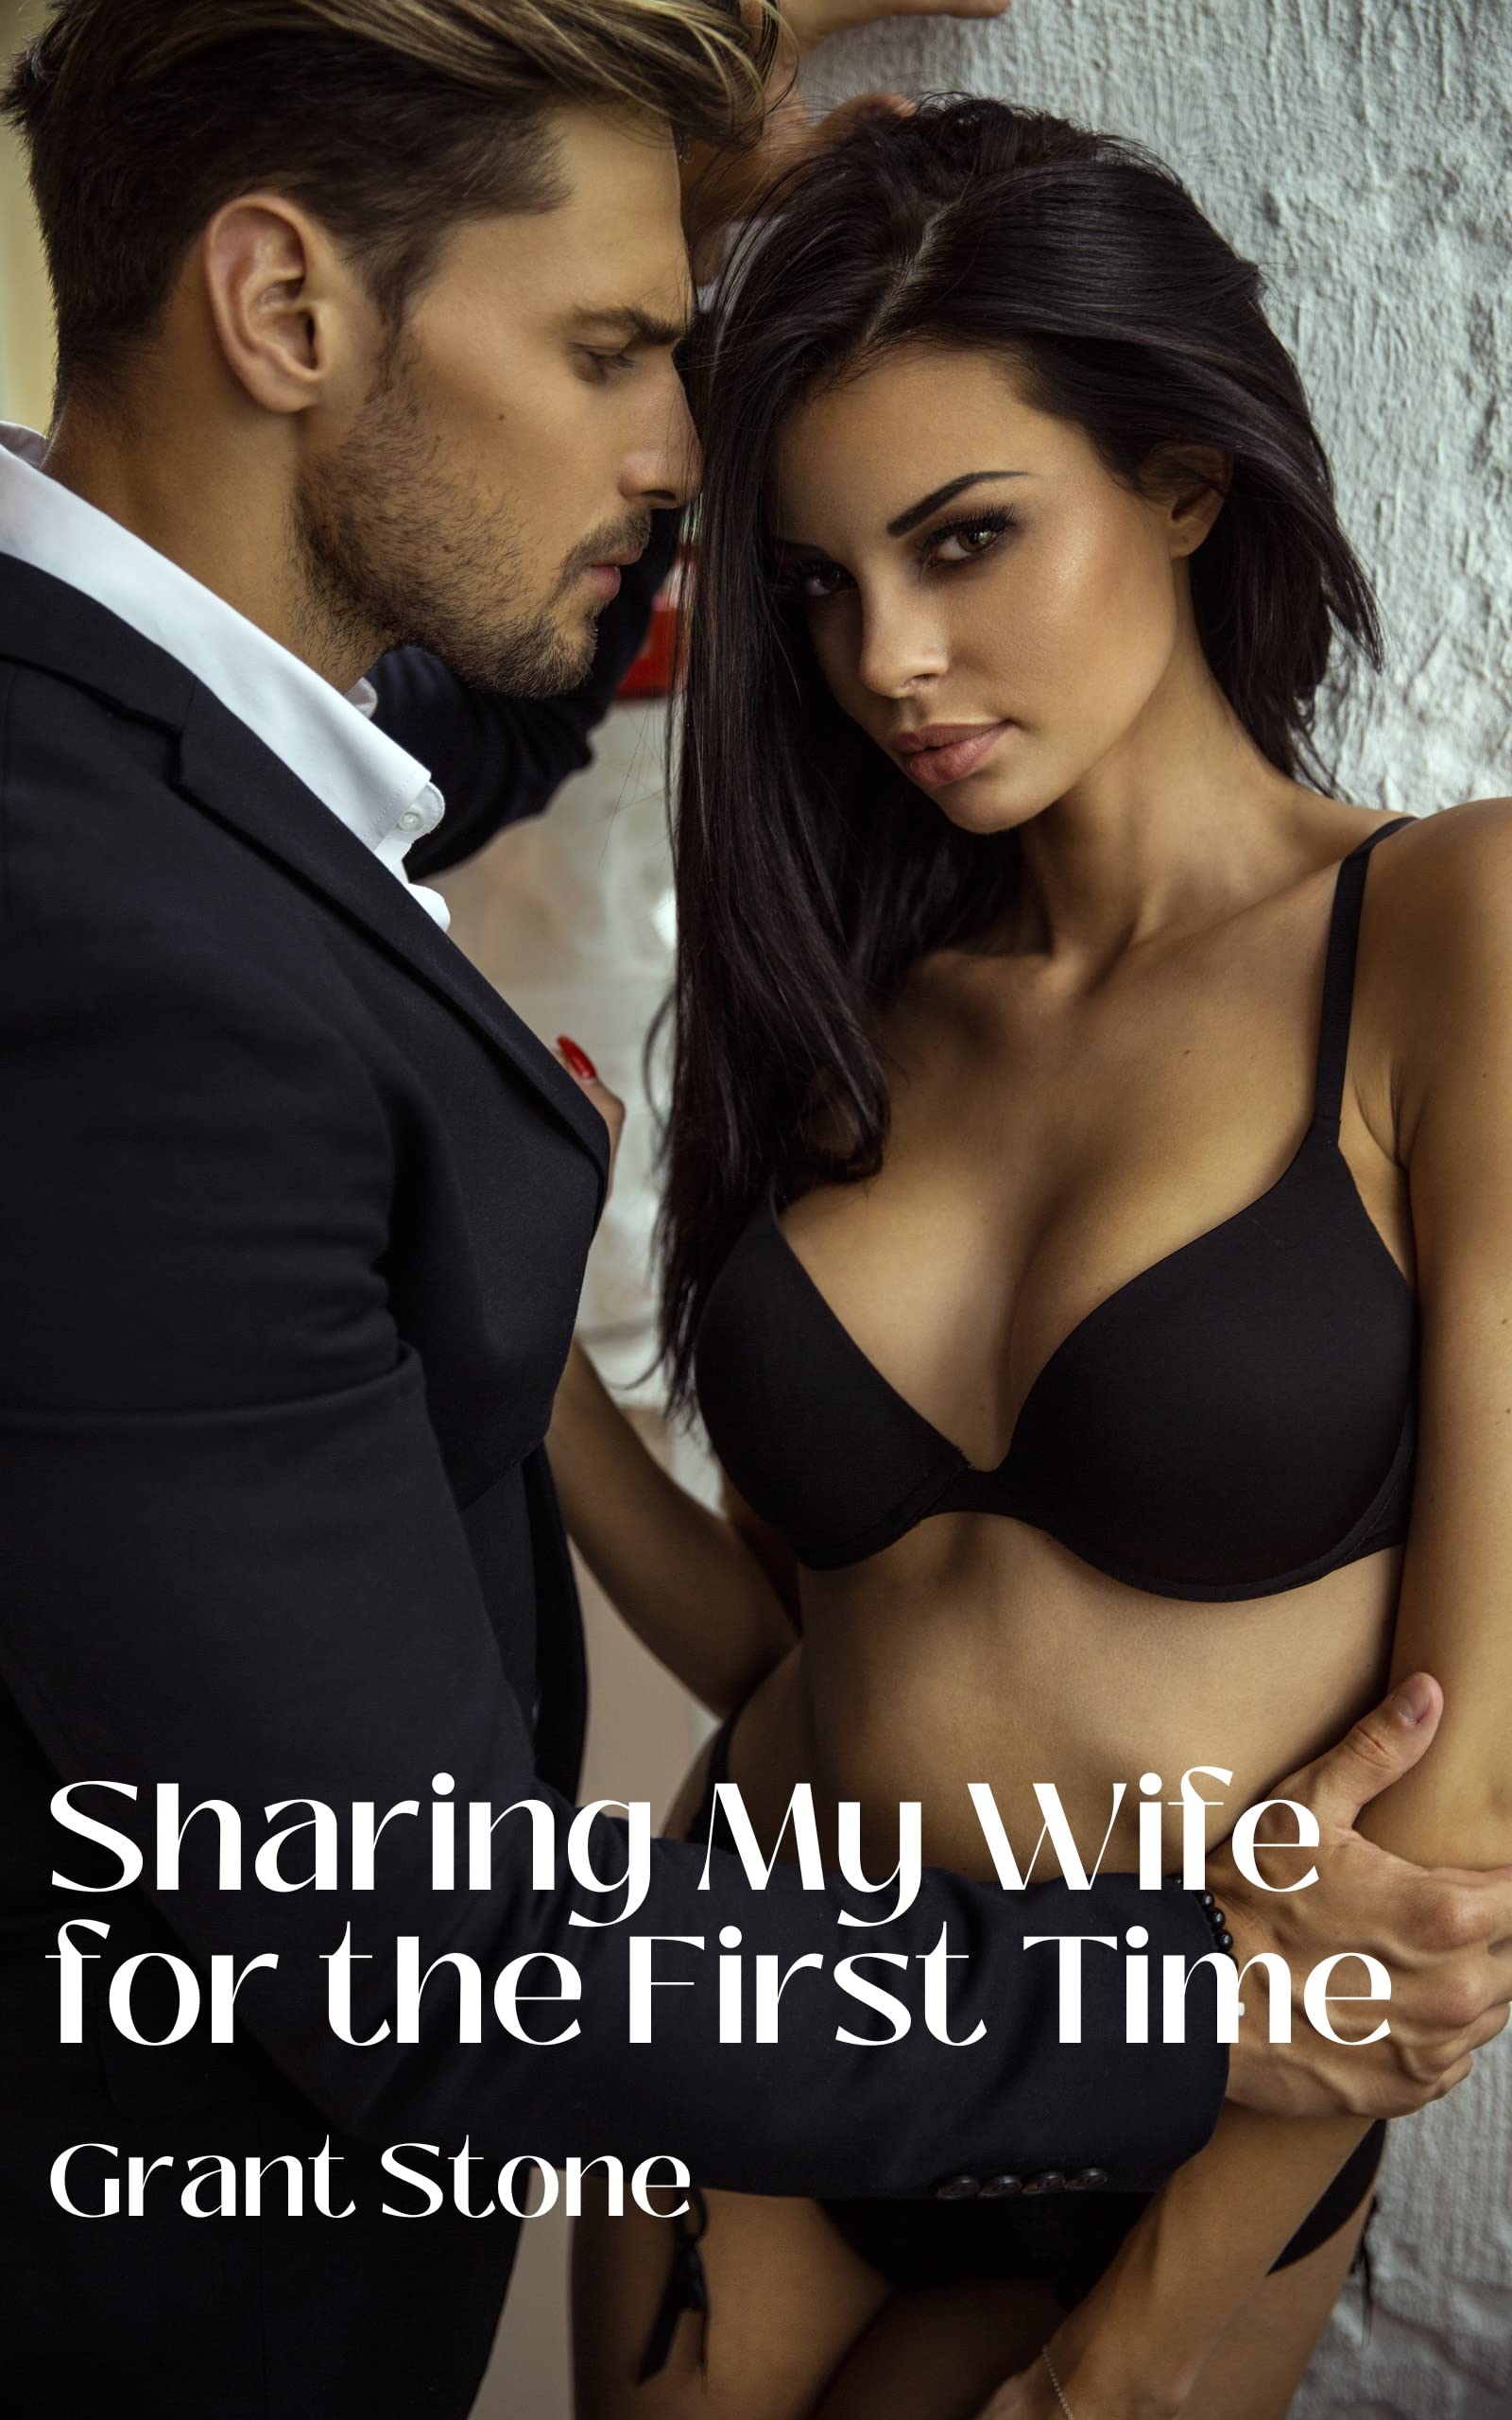 brian stress recommends love sharing my hot wife pic